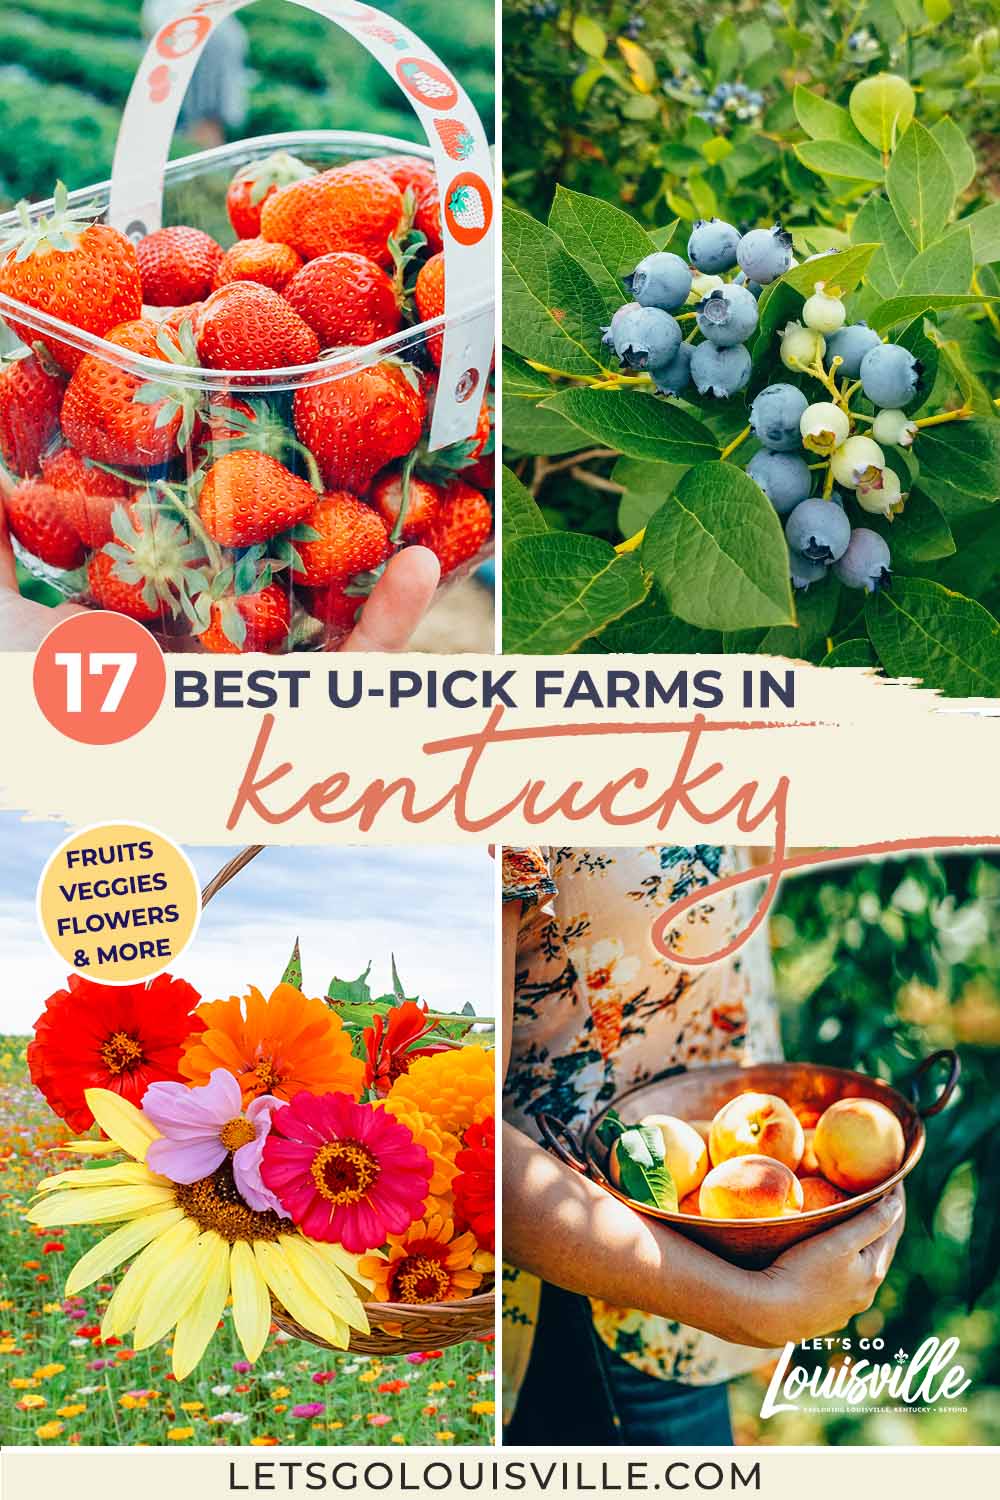 Complete guide to the best u-pick farms in Kentucky (and southern Indiana) from spring flowers to summer berries and fall apple orchards & pumpkin picking!